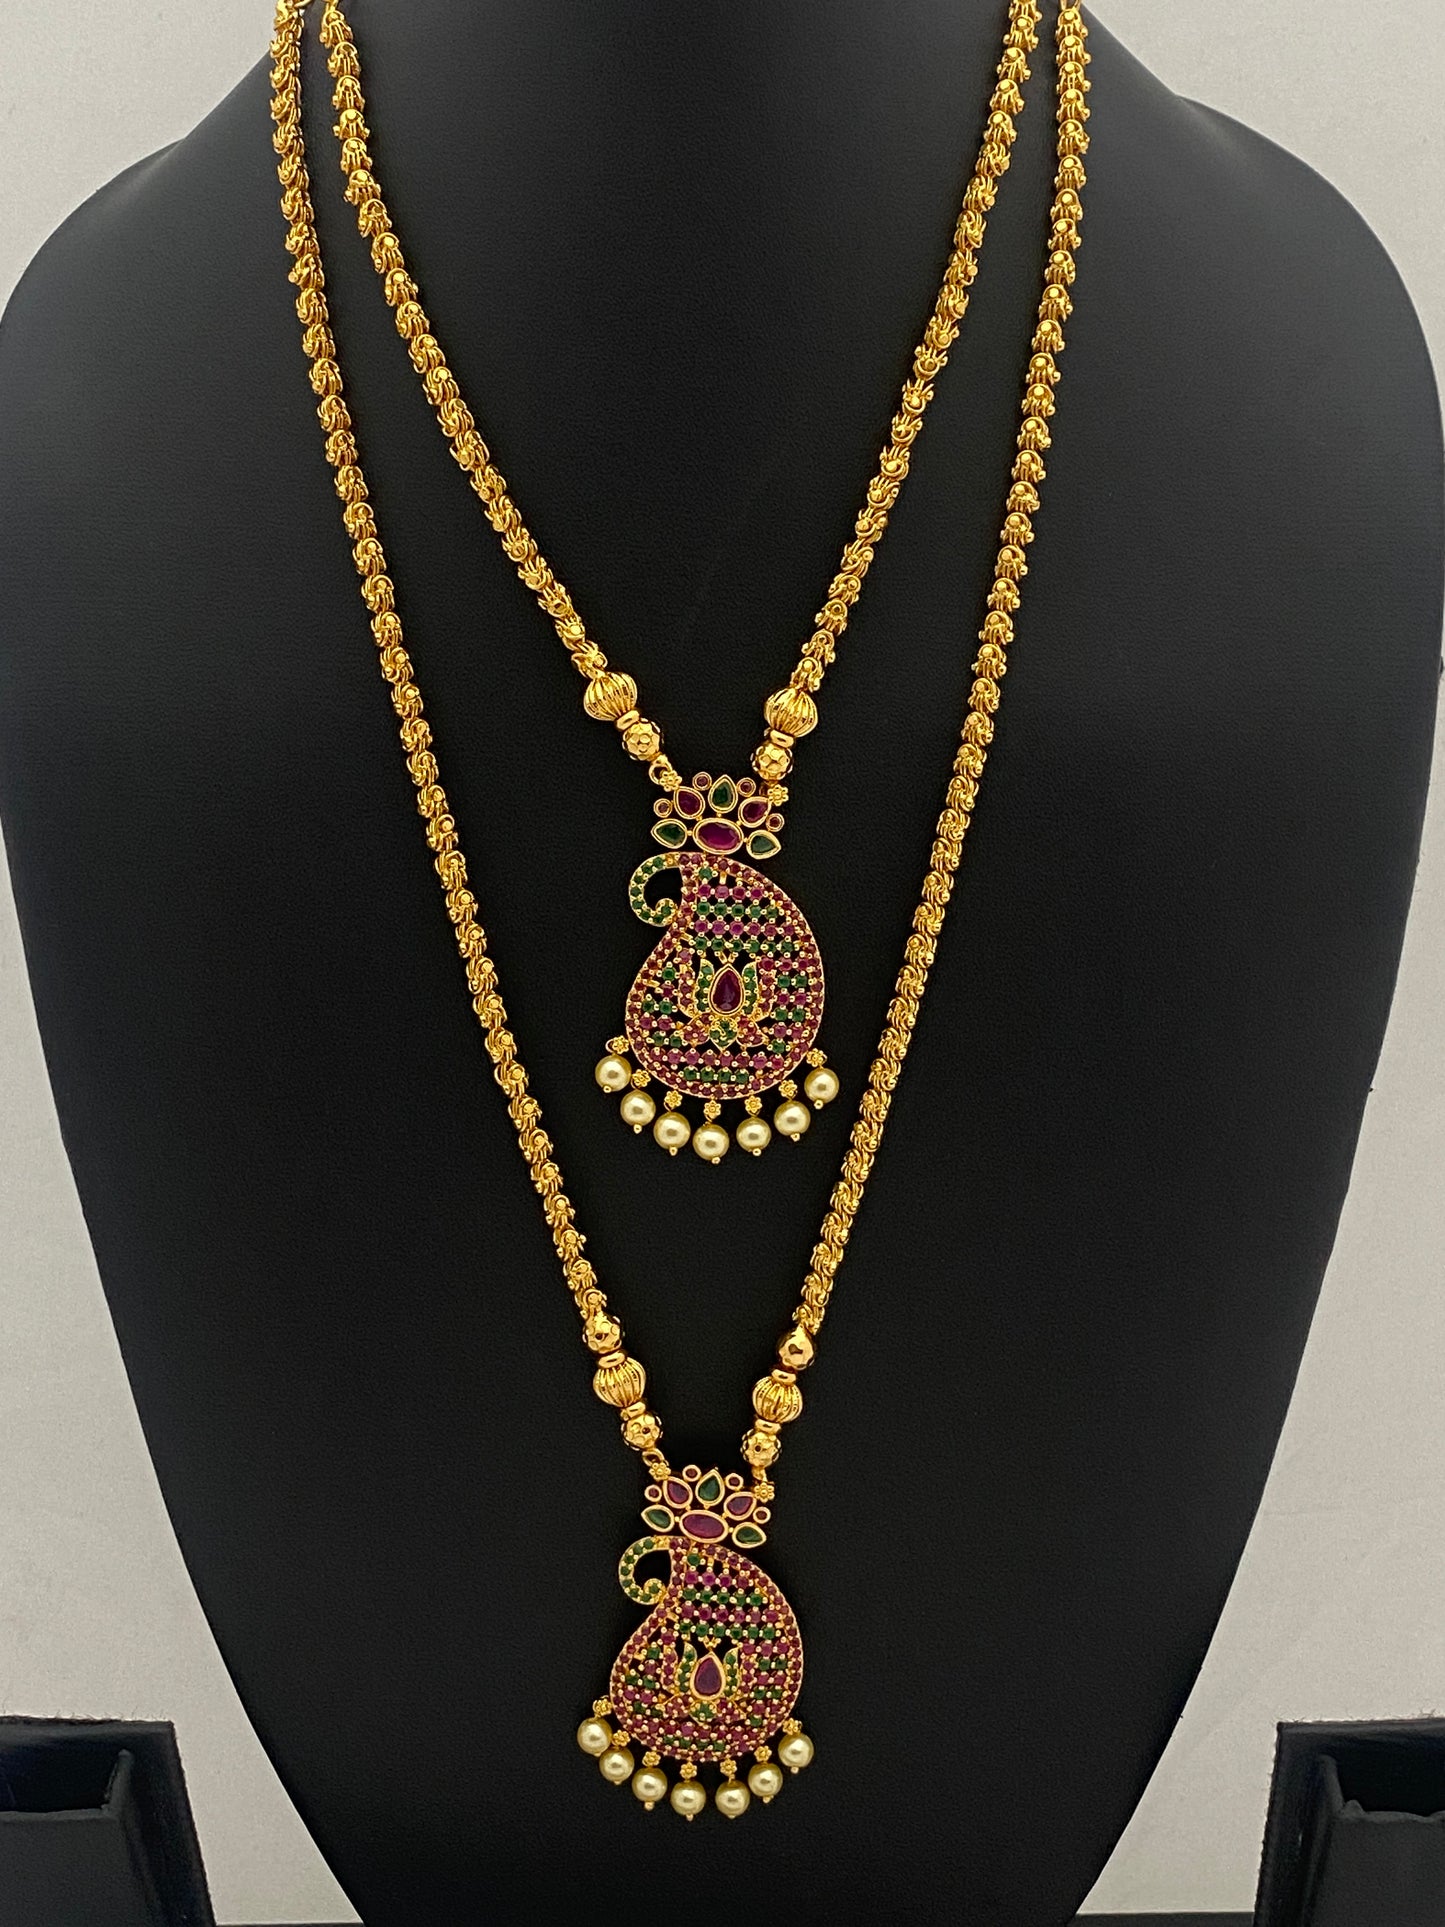 Gorgeous Gold Plated Long Chain And Necklace With Manga Design Pendant